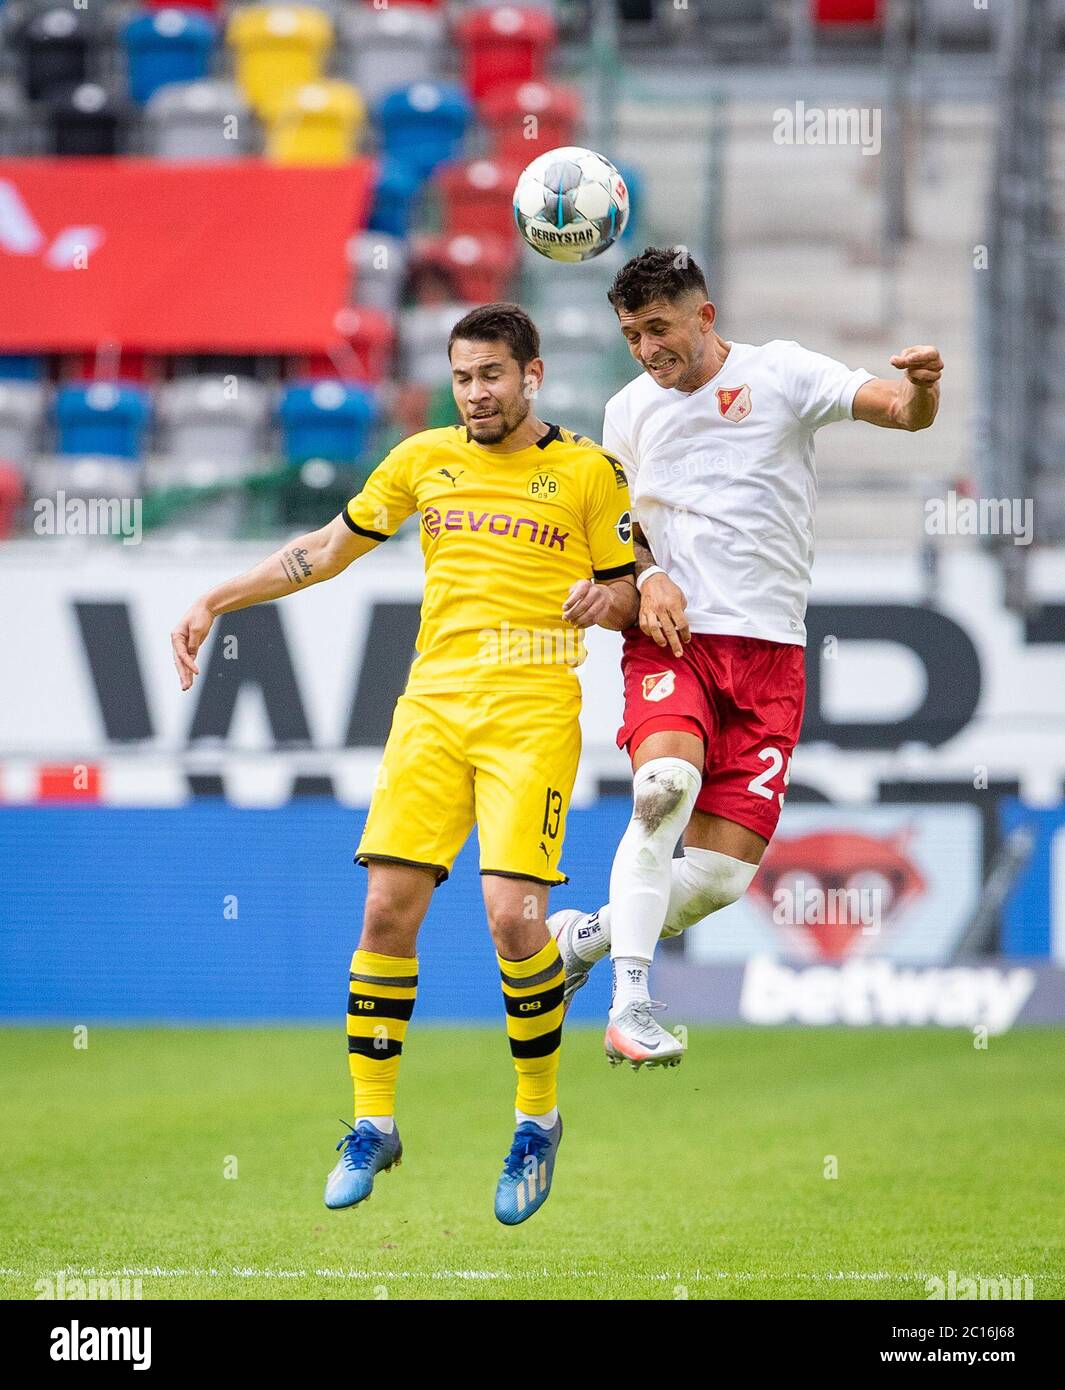 Merkur Spiel Arena Duesseldorf Germany 13.6.2020, Football: Bundesliga season 2019/20 matchday 31  Fortuna Düsseldorf (F95, white) vs Borussia Dortmund (BVB, yellow) 0:1 — Raphael Guerreiro (Borussia Dortmund), Matthias Zimmermann (Fortuna Duesseldorf) Due to the Corona pandemic matches are played in empty stadiums without spectators  Foto:  Moritz Mueller /firosportphoto//POOL/via Kolvenbach       DFL REGULATIONS PROHIBIT ANY USE OF PHOTOGRAPHS AS IMAGE SEQUENCES AND OR QUASI VIDEO     EDITORIAL USE ONLY     NATIONAL AND INTERNATIONAL NEWS AGENCIES OUT c Stock Photo